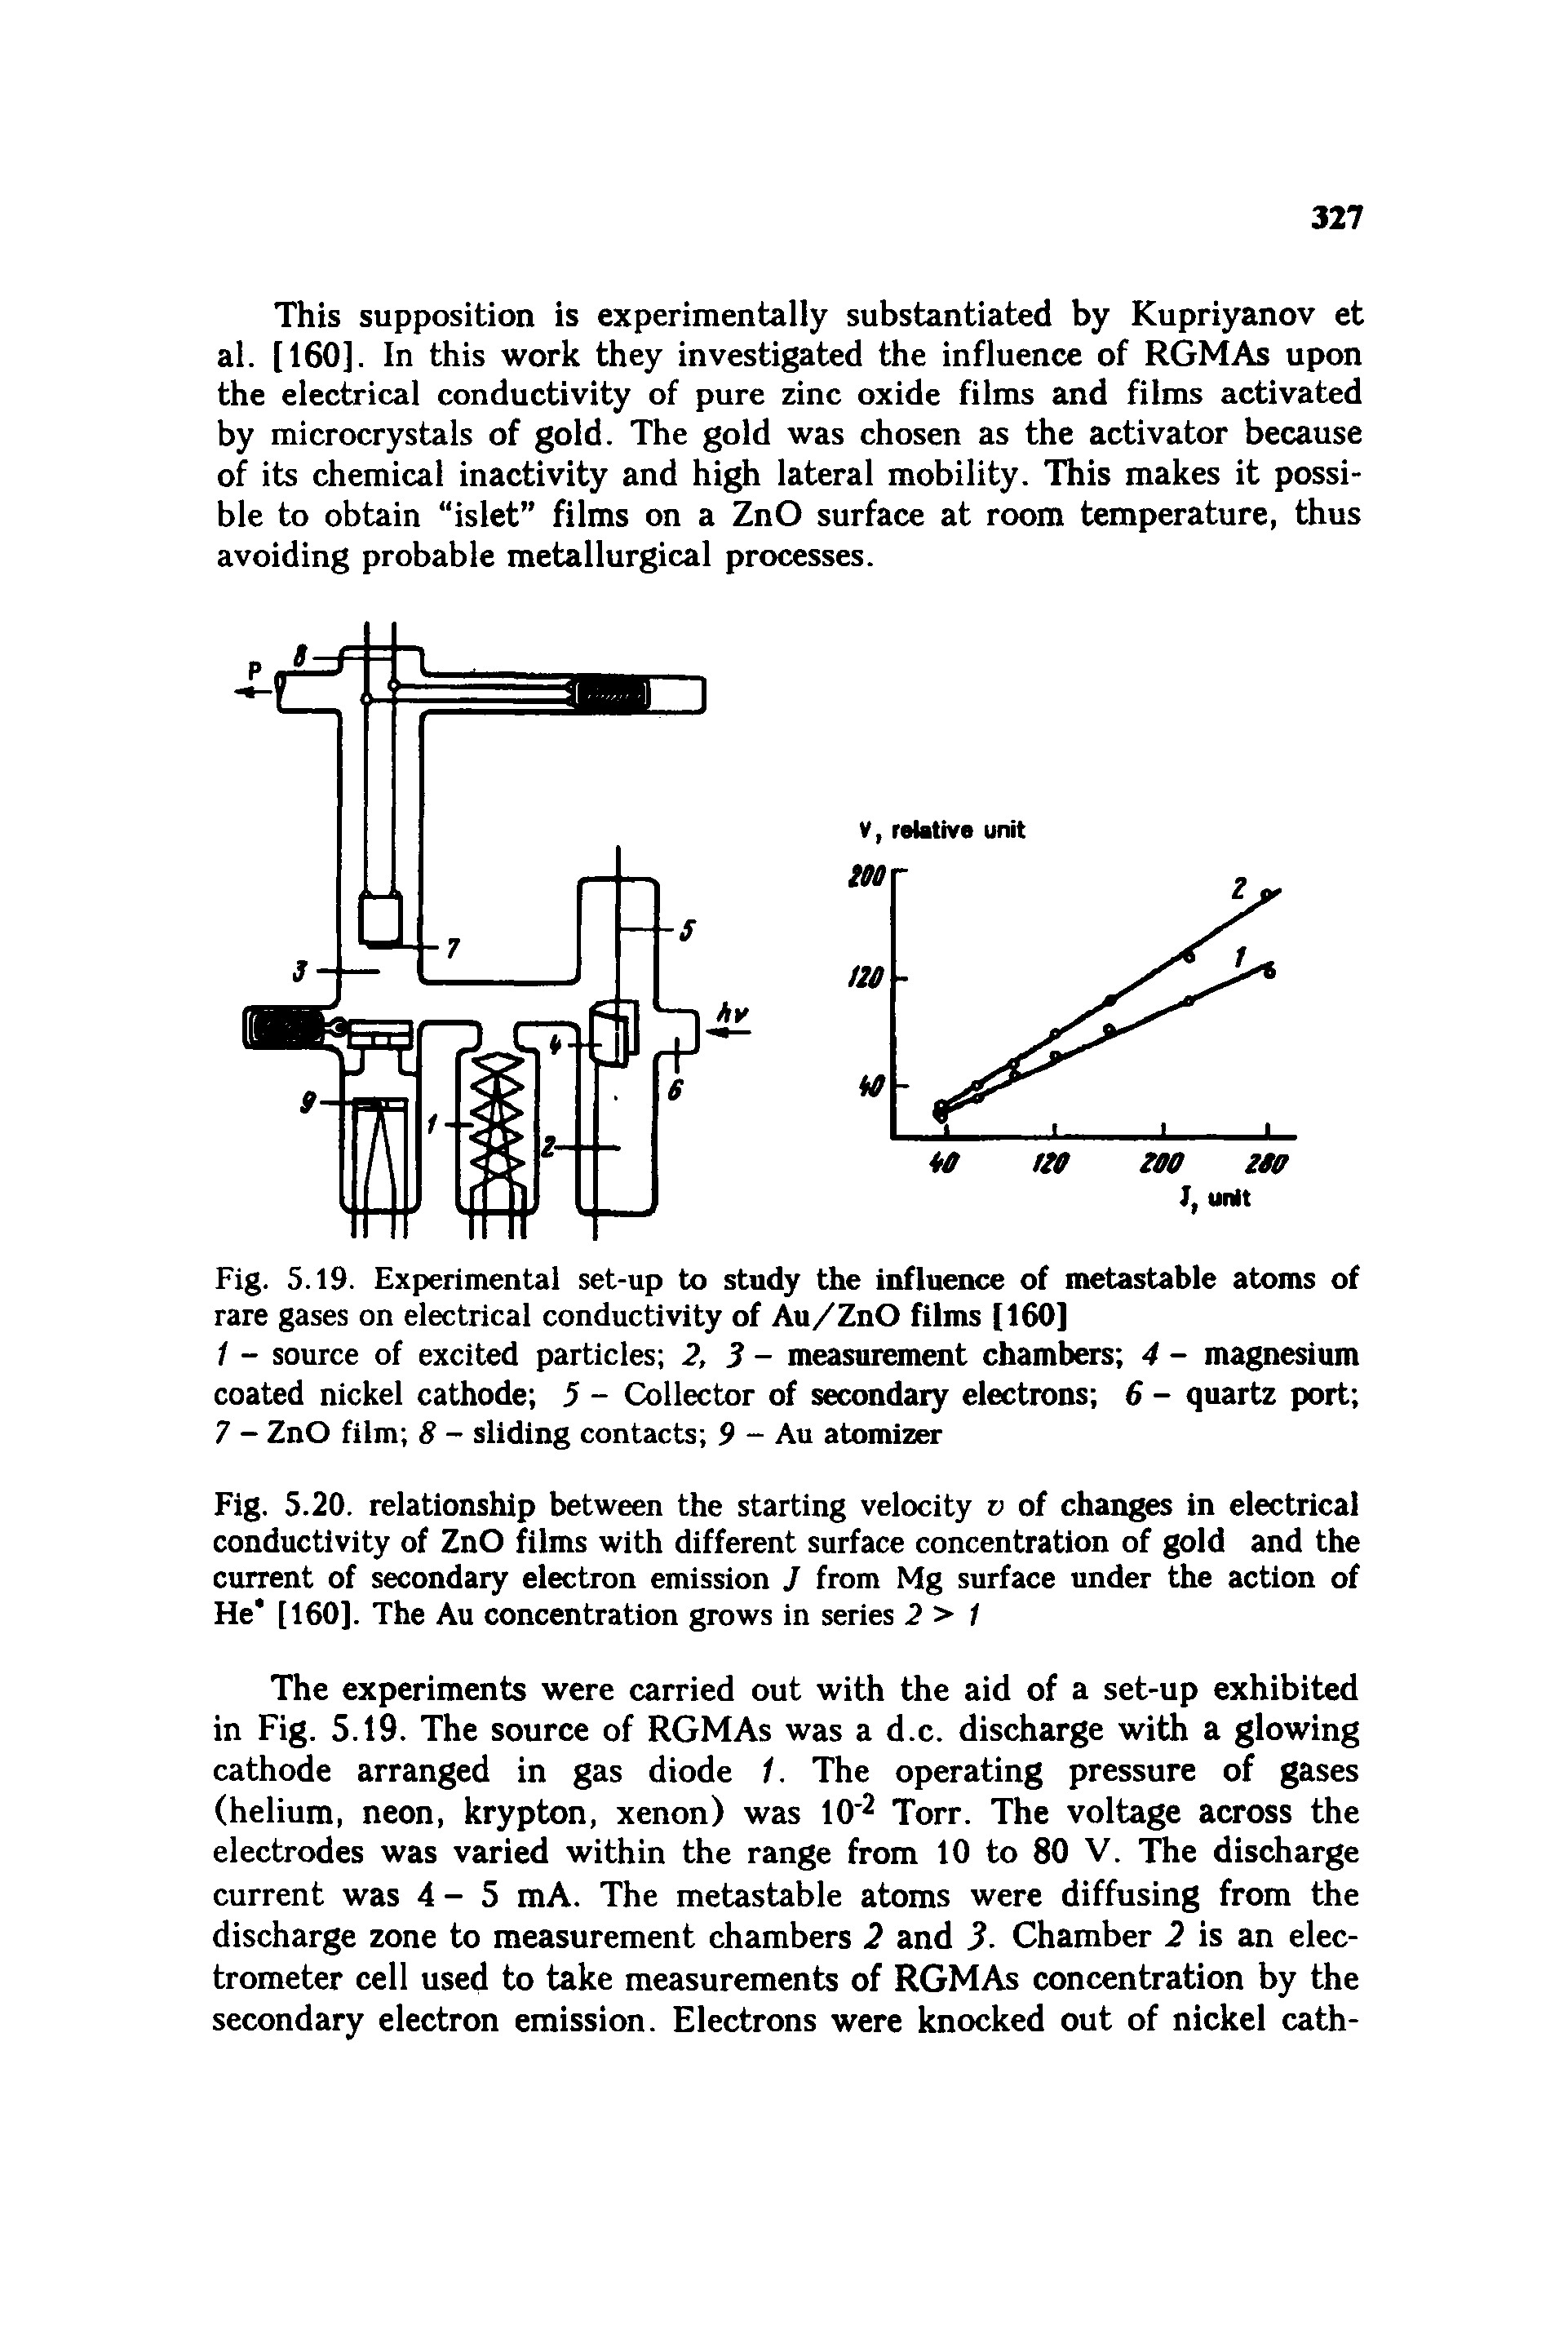 Fig. 5.19. Experimental set-up to study the influence of metastable atoms of rare gases on electrical conductivity of Au/ZnO films [160]...